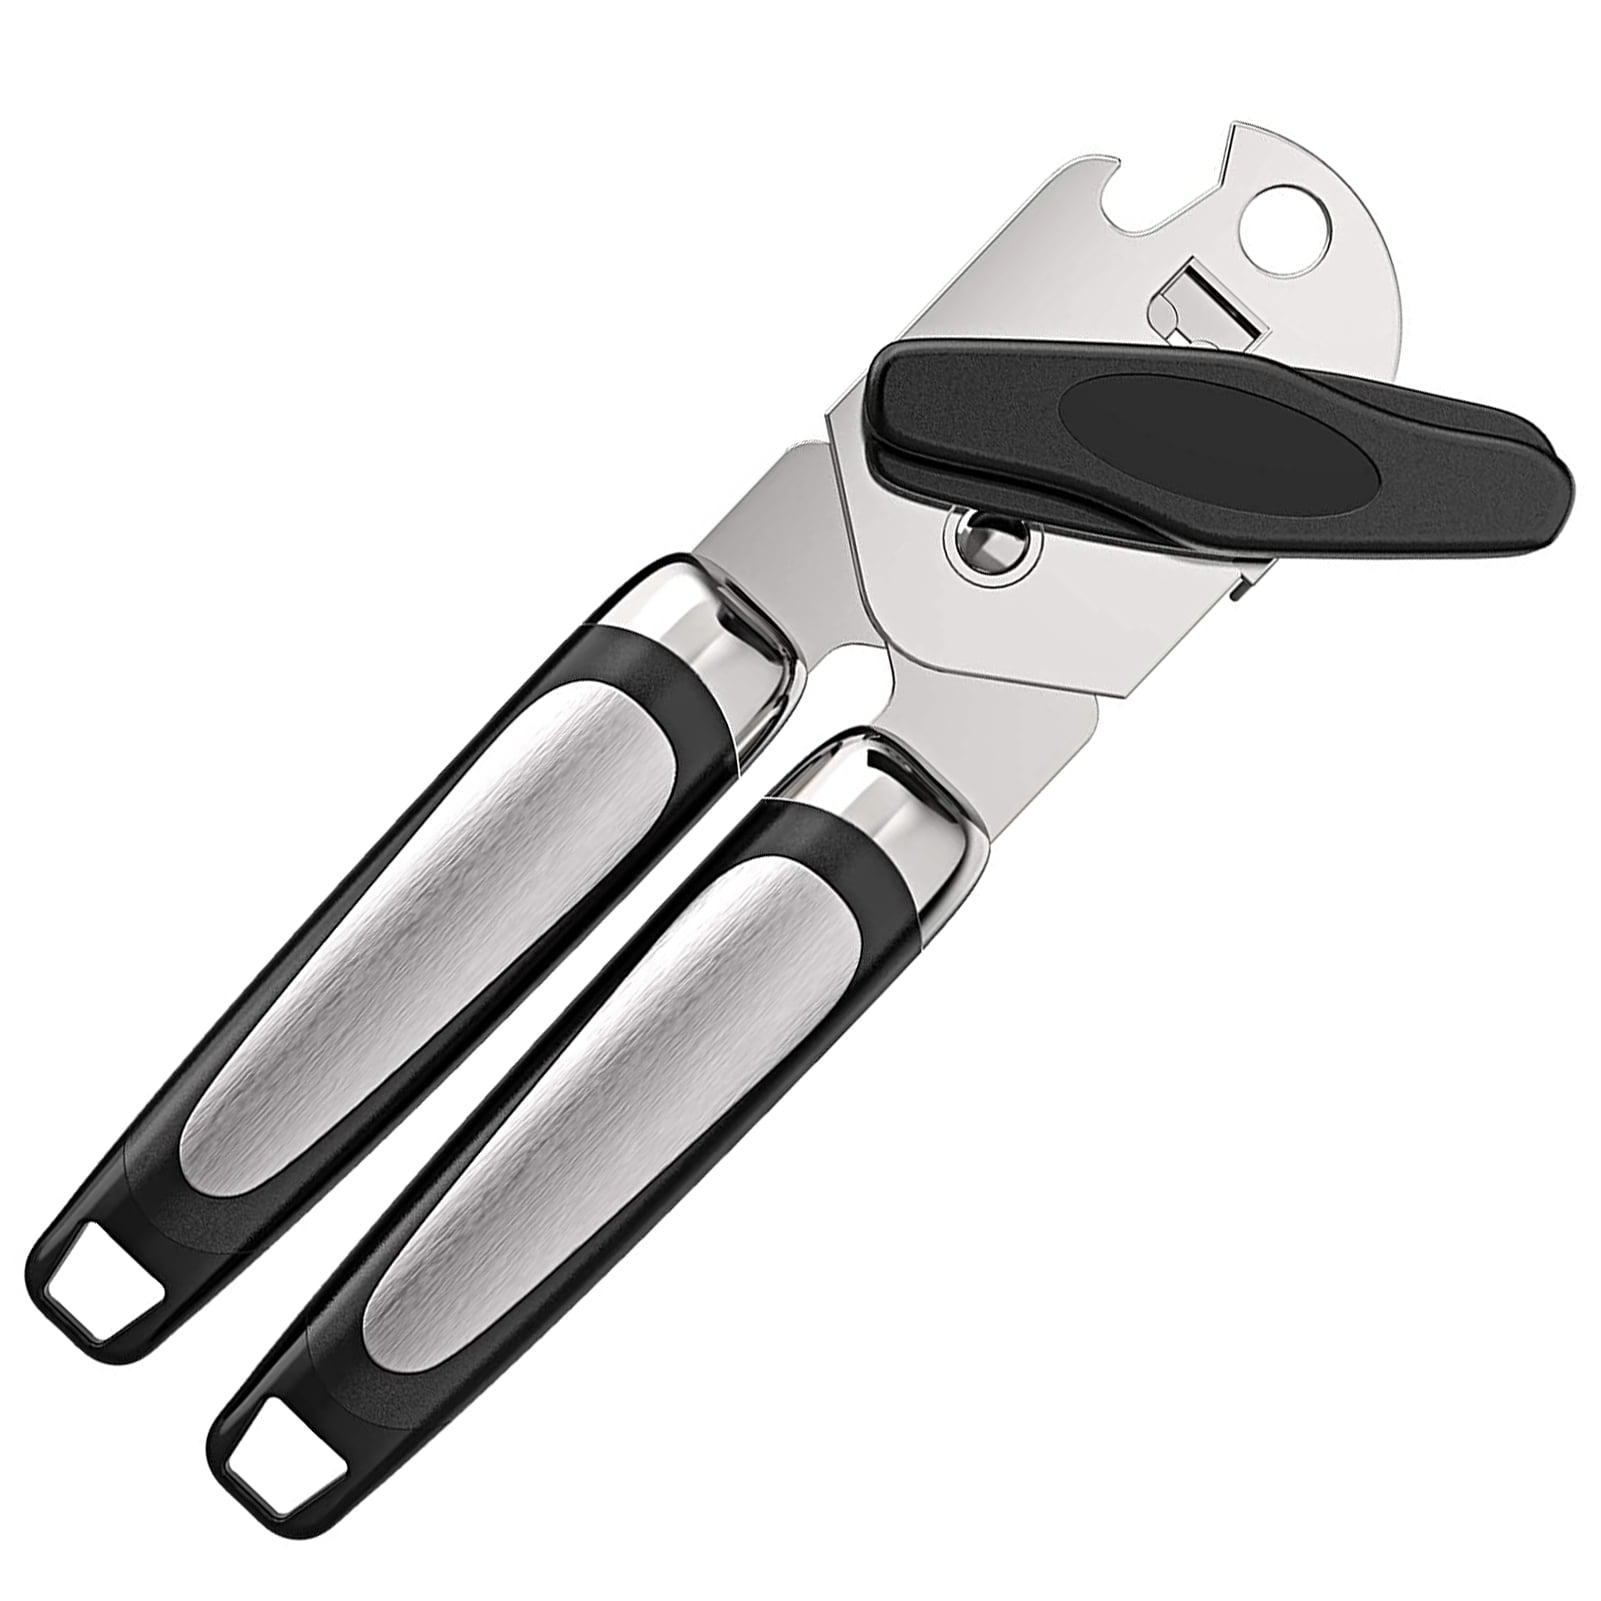 Professional Stainless Steel Strong Heavy Duty Chrome Tin Can Opener Kitchen Restaurant Home Craft Easy Gripping